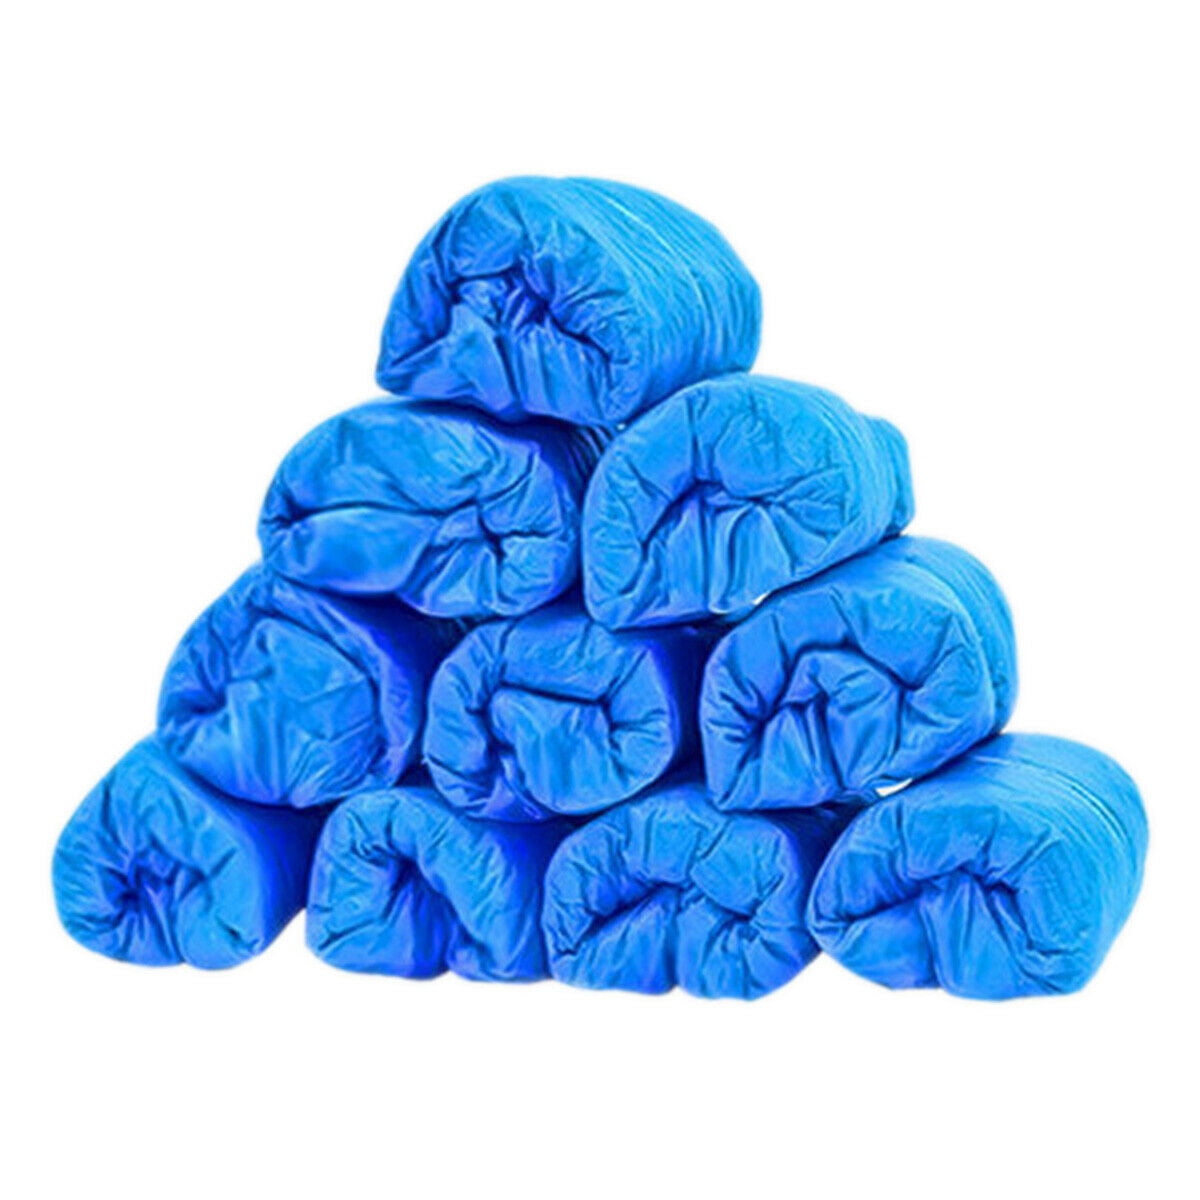 100Pcs Disposable Shoe Covers Boots Cover Workplace Indoor Carpet Overshoes 